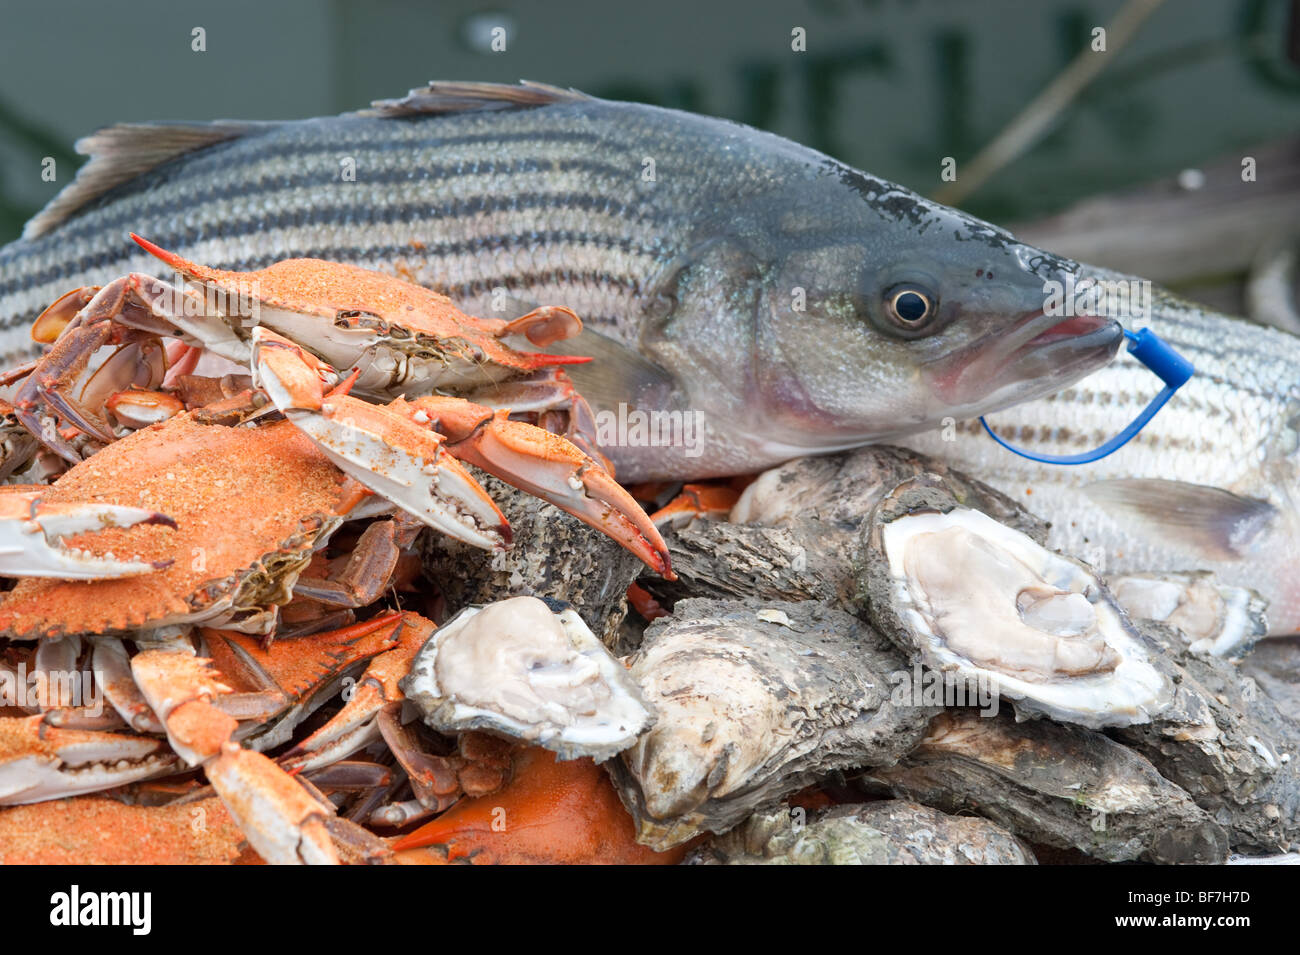 Crabs, oysters, and rockfish on the eastern shore Stock Photo